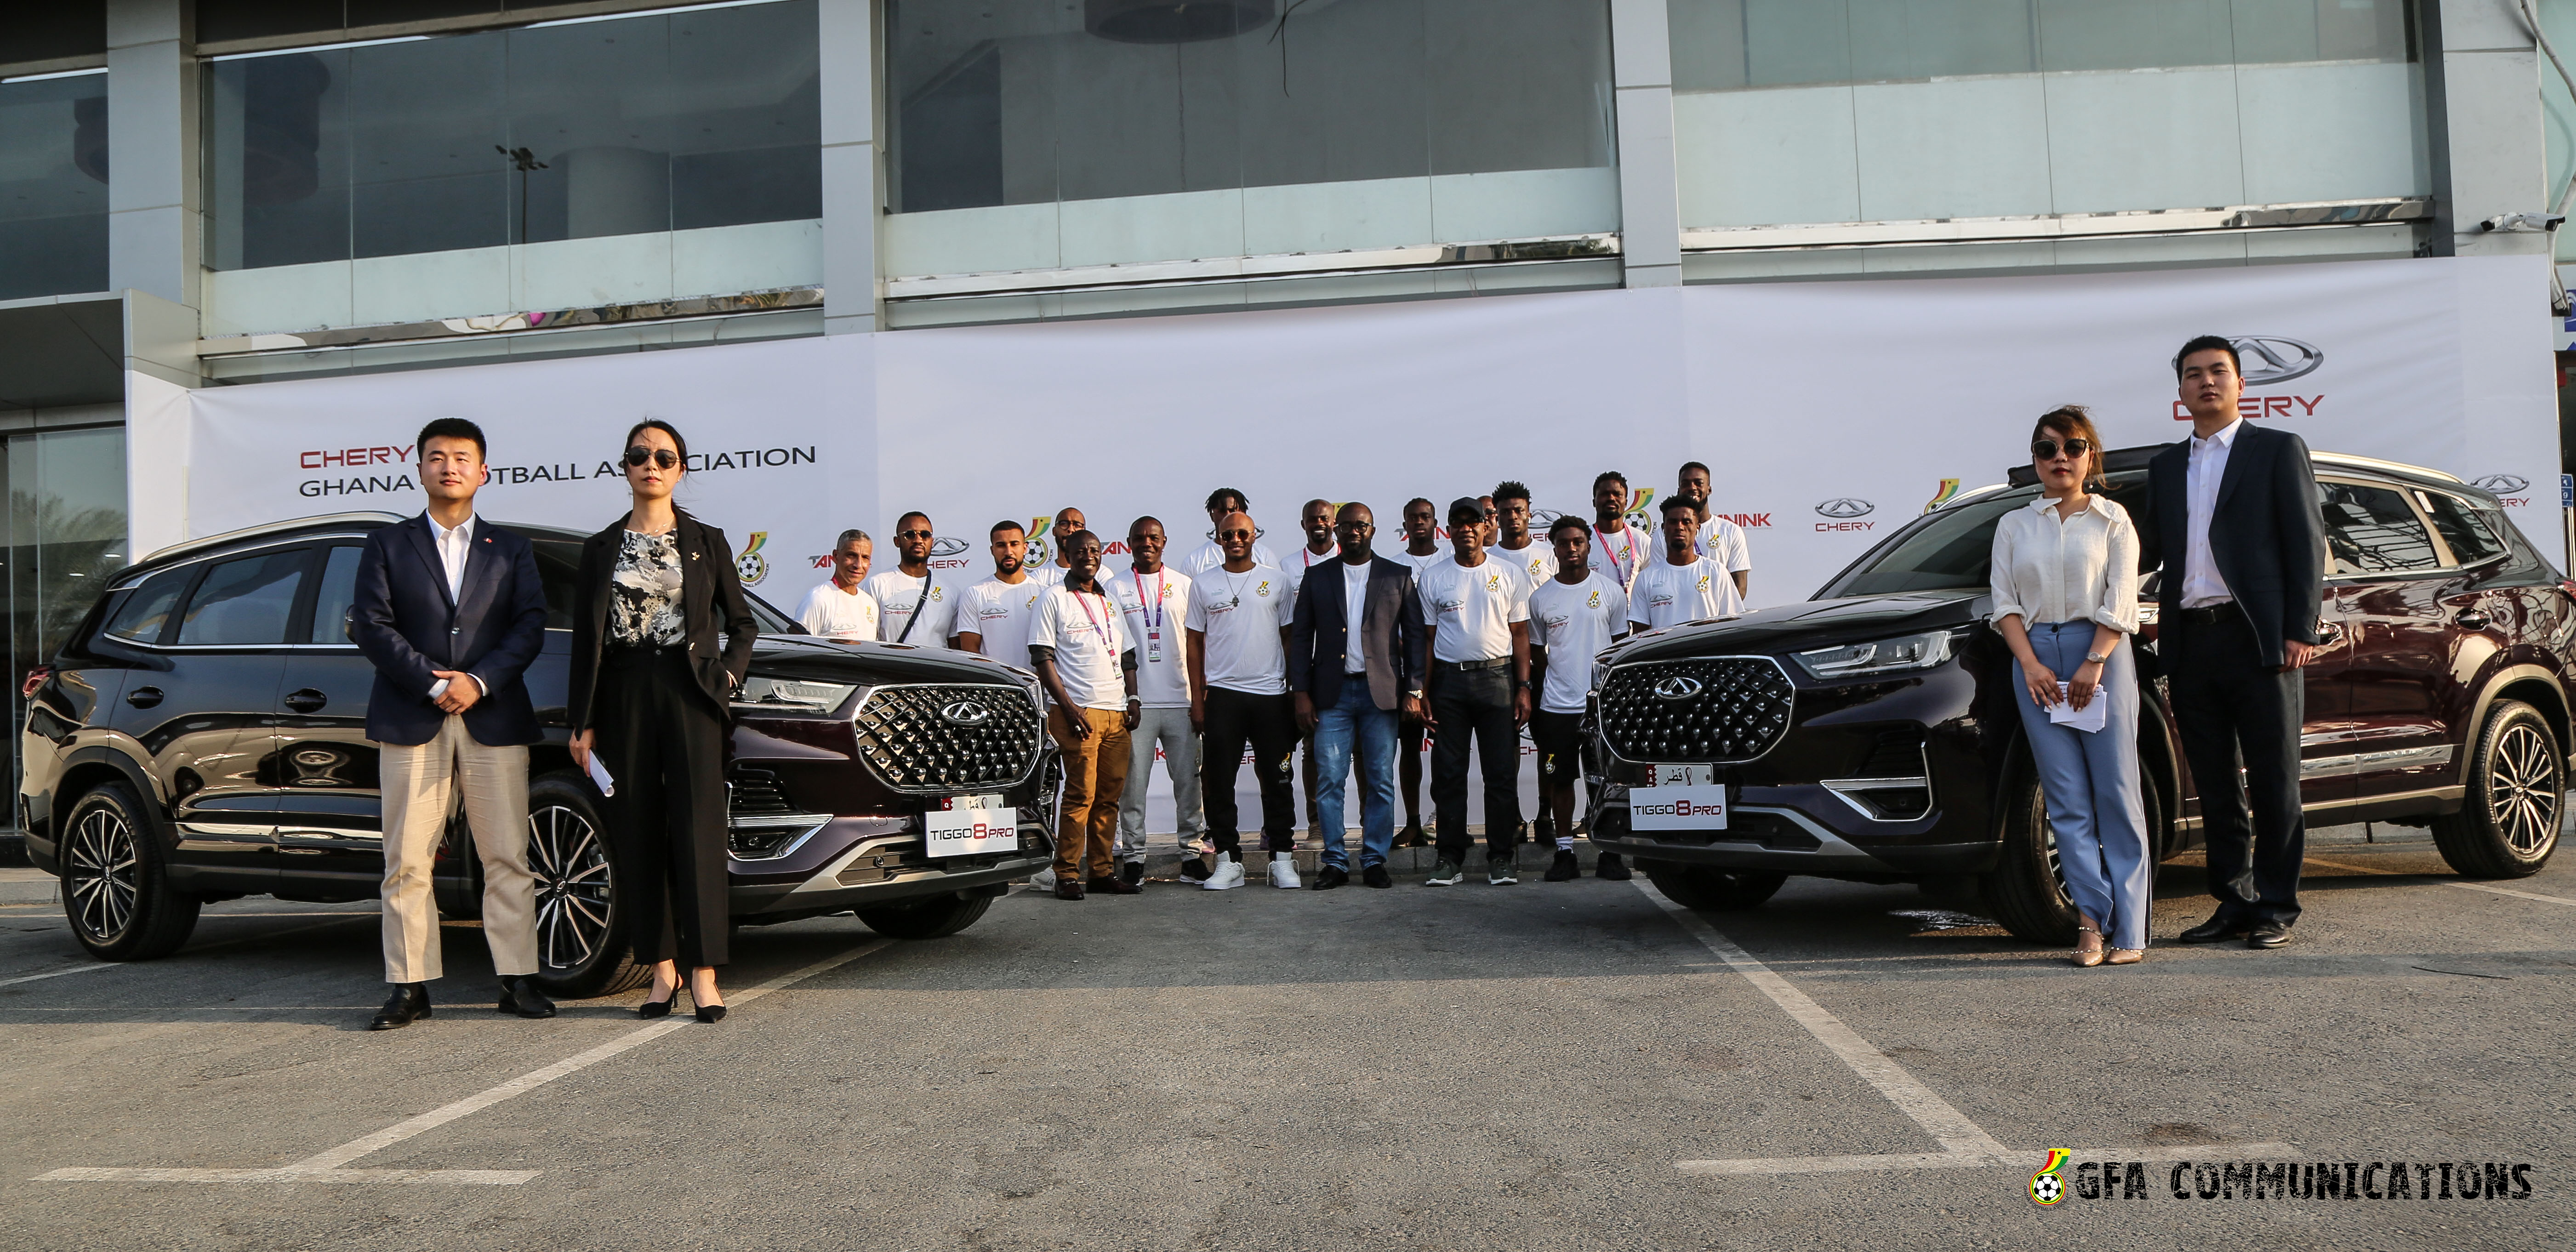 Black Stars visit vehicle partners Chery on day off